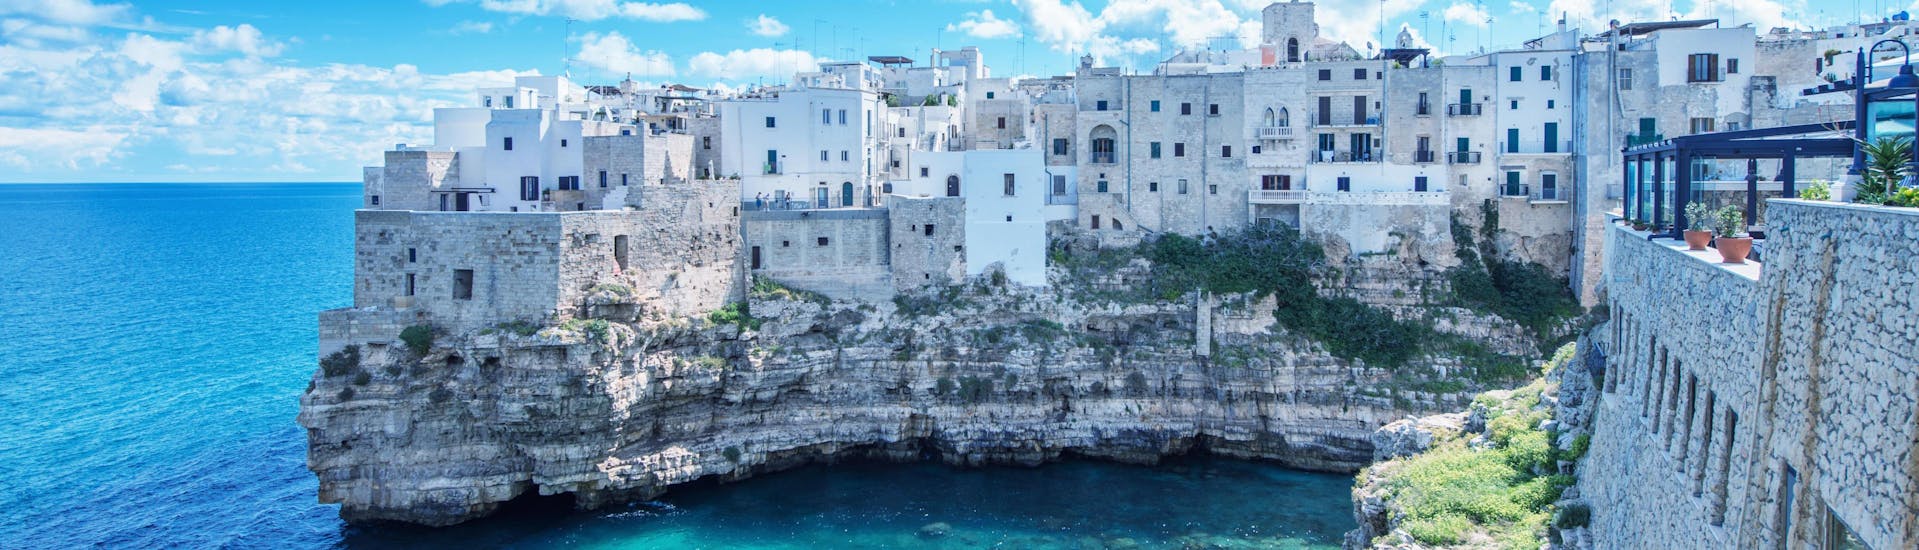 An image of the turquoise waters around Polignano a Mare that visitors get to witness on a boat trip in Puglia.